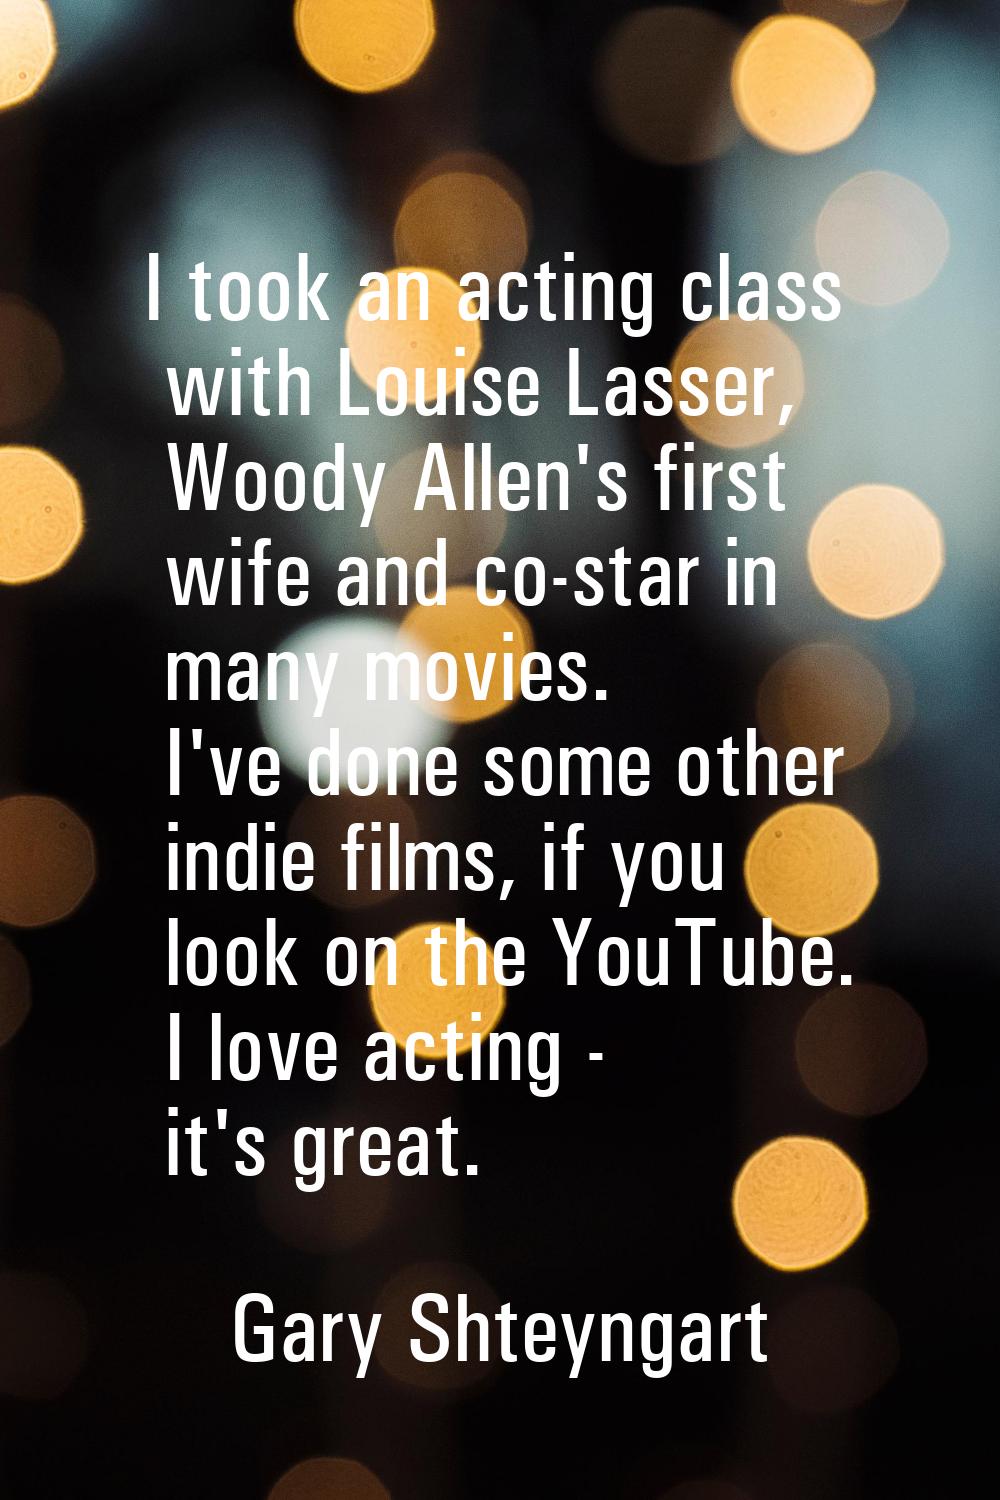 I took an acting class with Louise Lasser, Woody Allen's first wife and co-star in many movies. I'v